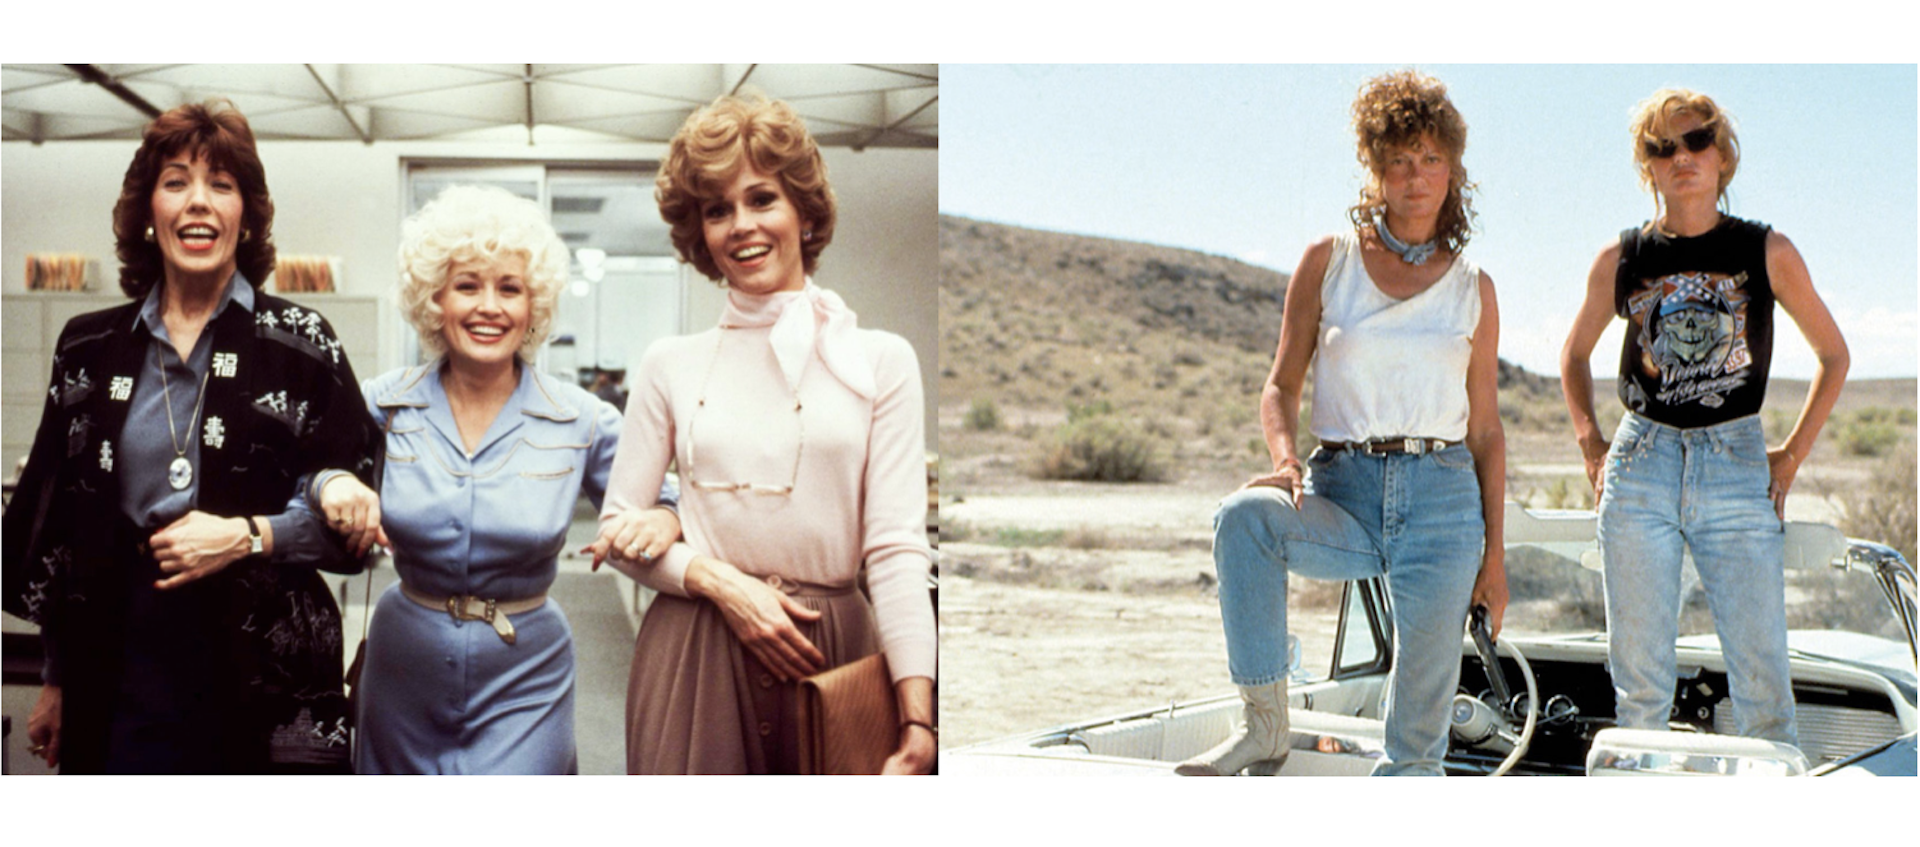 Side by side stills from the films 9 to 5 and Thelma & Louise